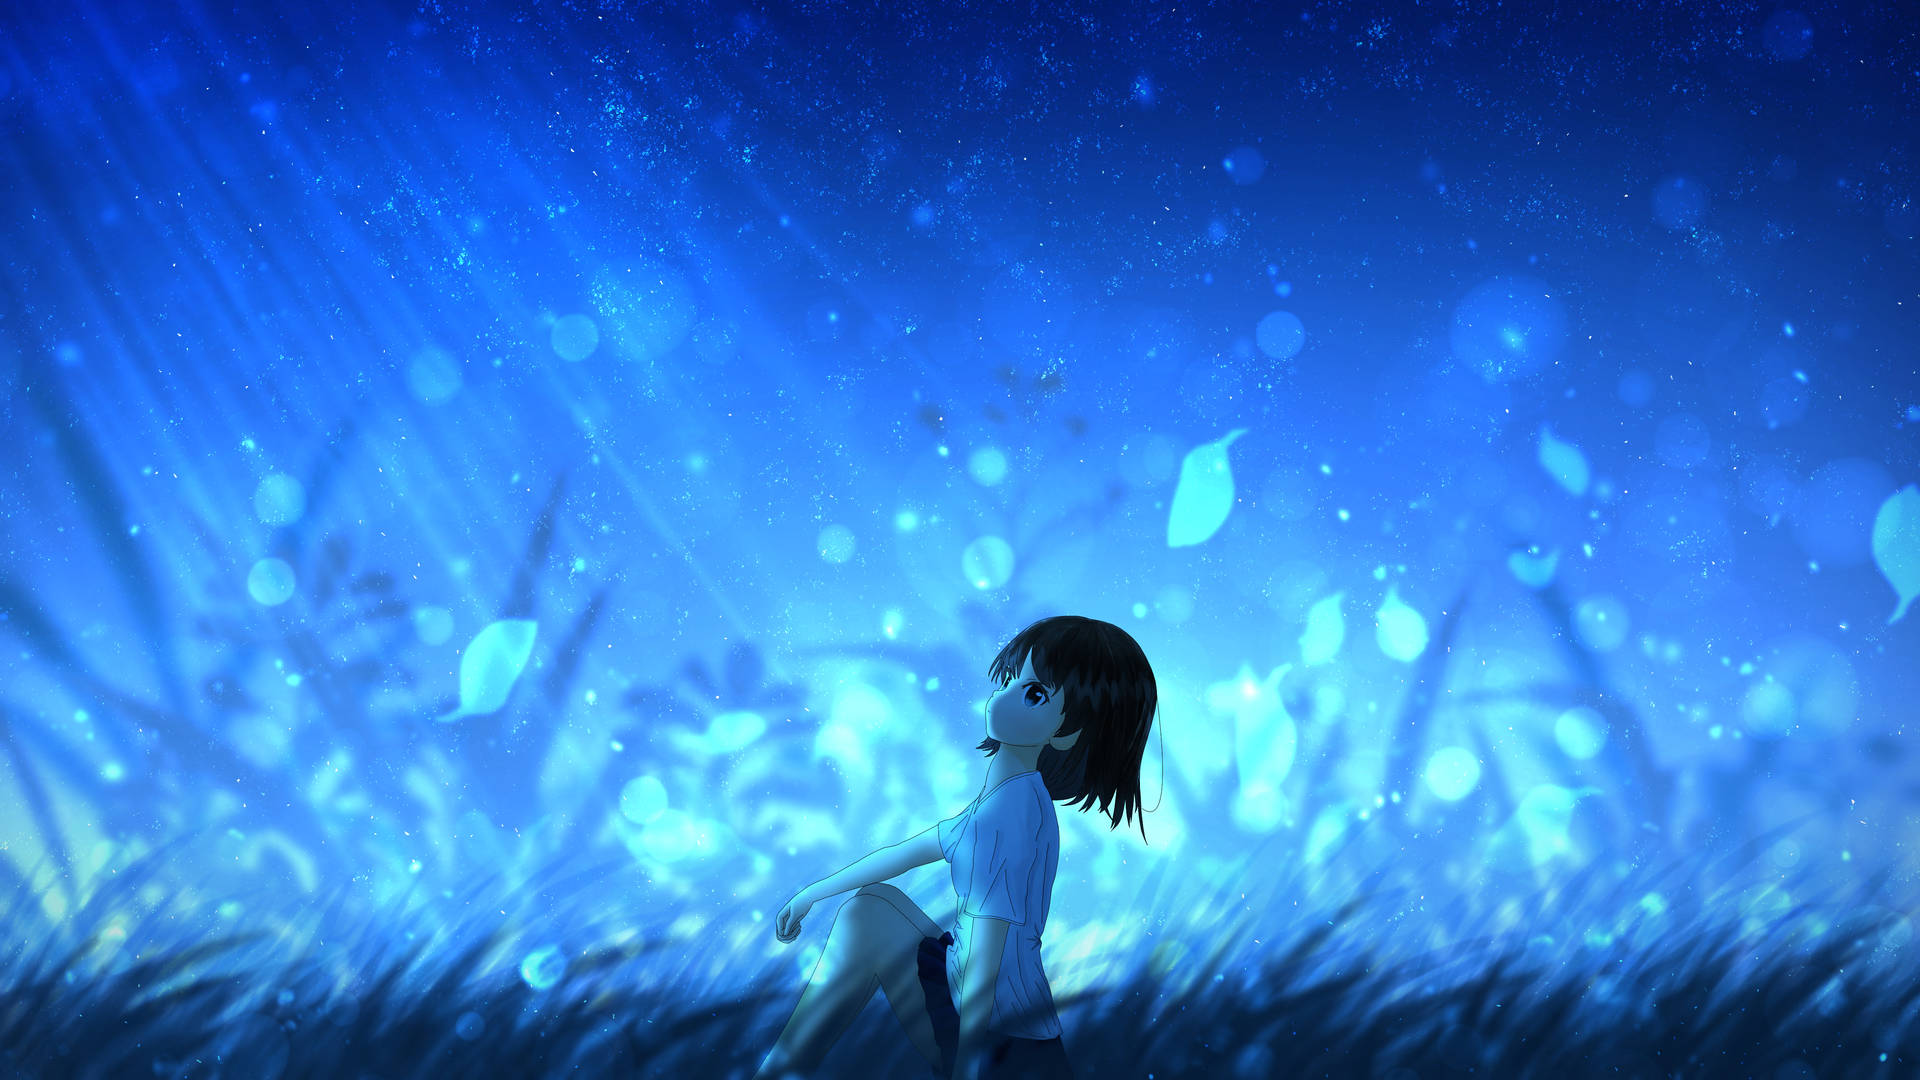 Animated Girl In Field Wallpaper